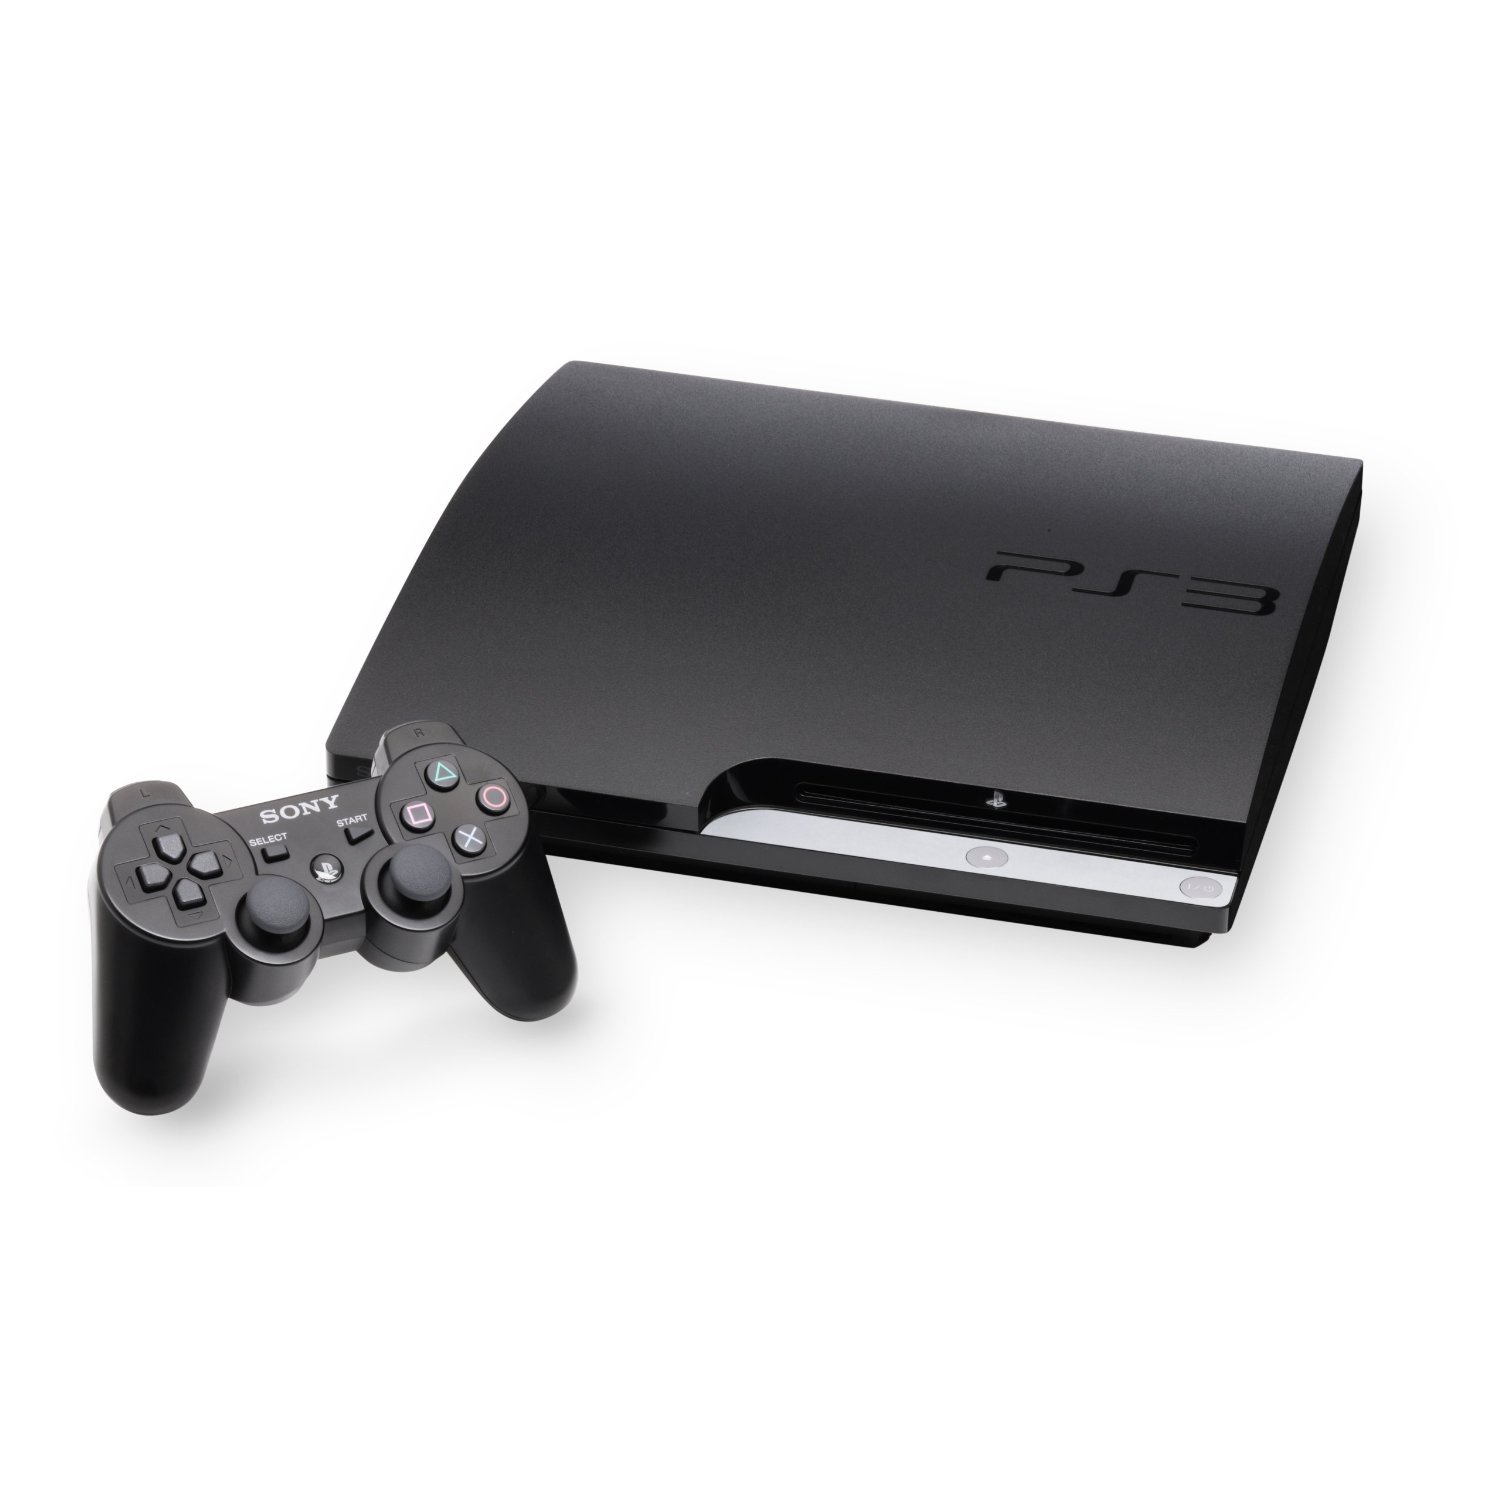 Sony PLAYSTATION 3 160GB Video Game System PS3 Console Blu-Ray - BRAND NEW 